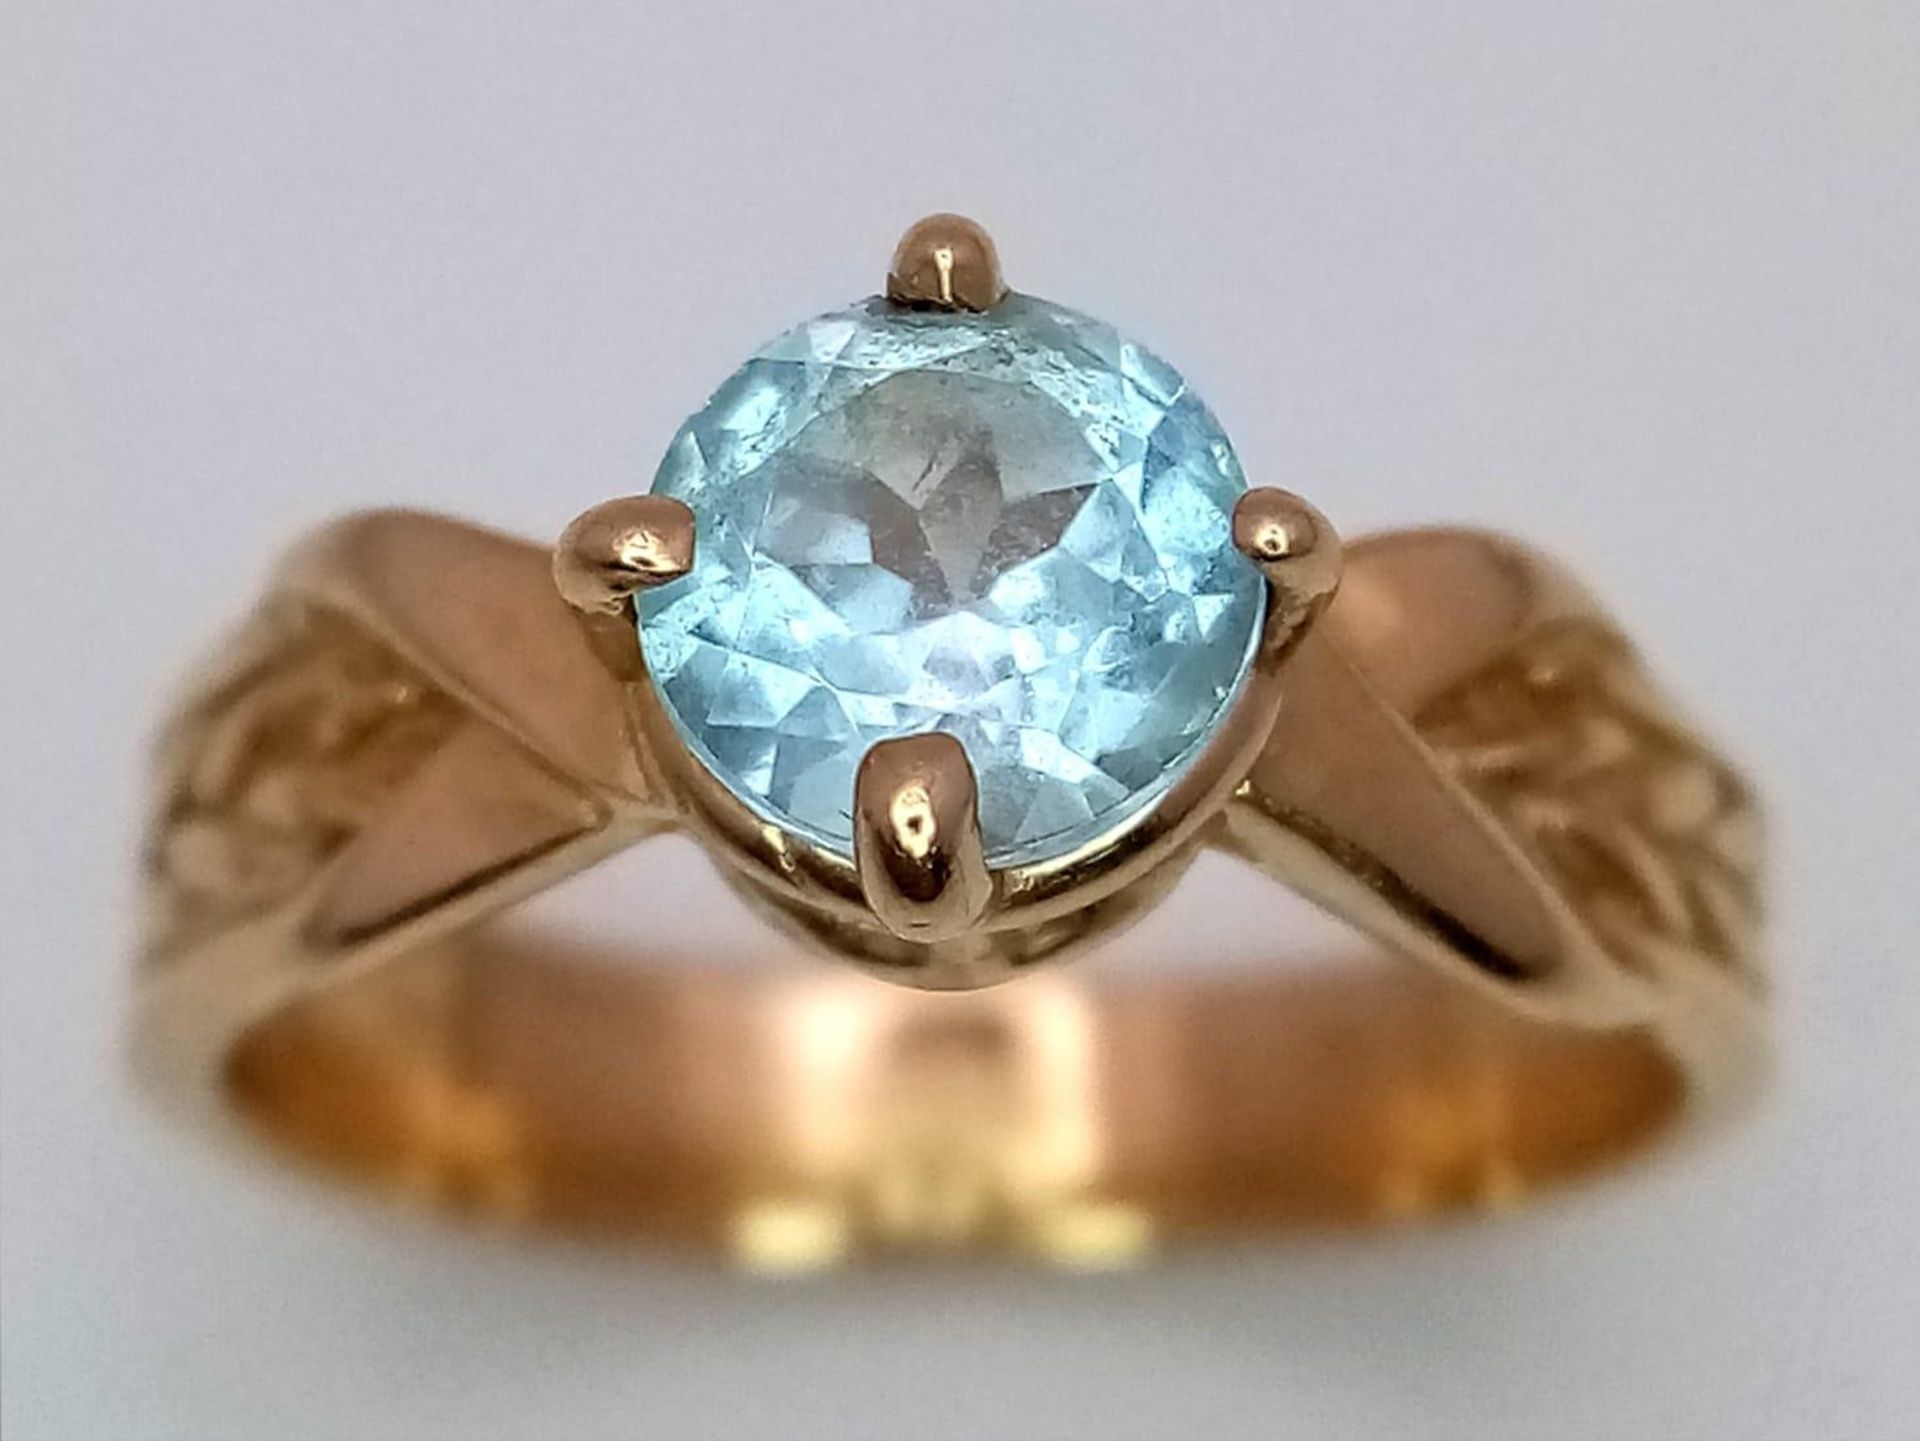 A Vintage 14K Yellow Gold Aquamarine Ring. Size K 1/2. 3.6g total weight. - Image 2 of 5